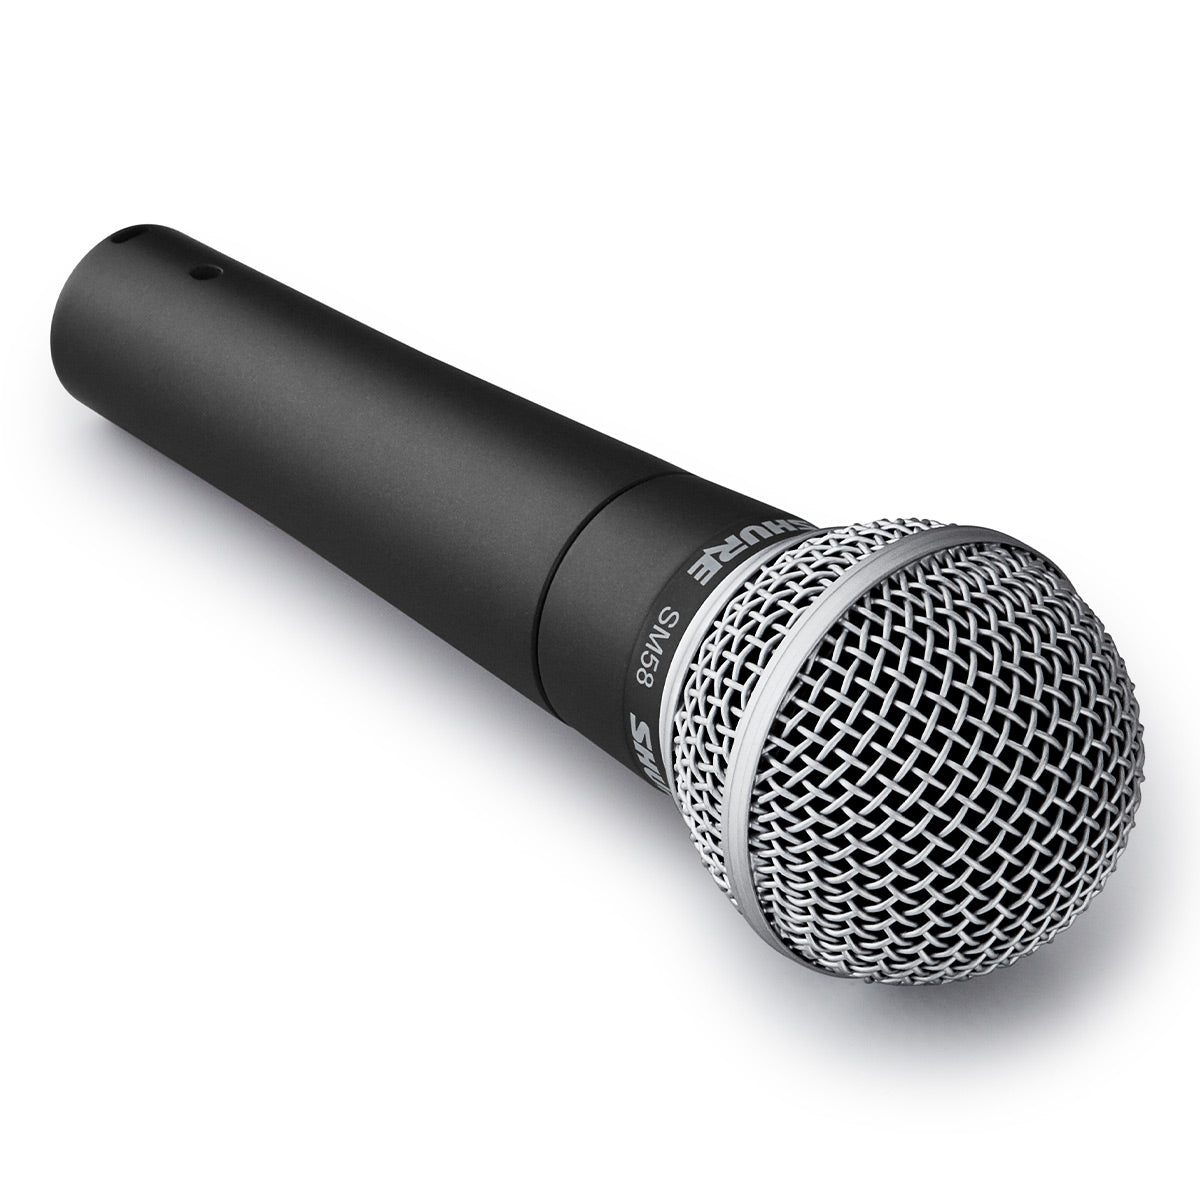 Shure SM58-LC Handheld Dynamic Vocal Microphone